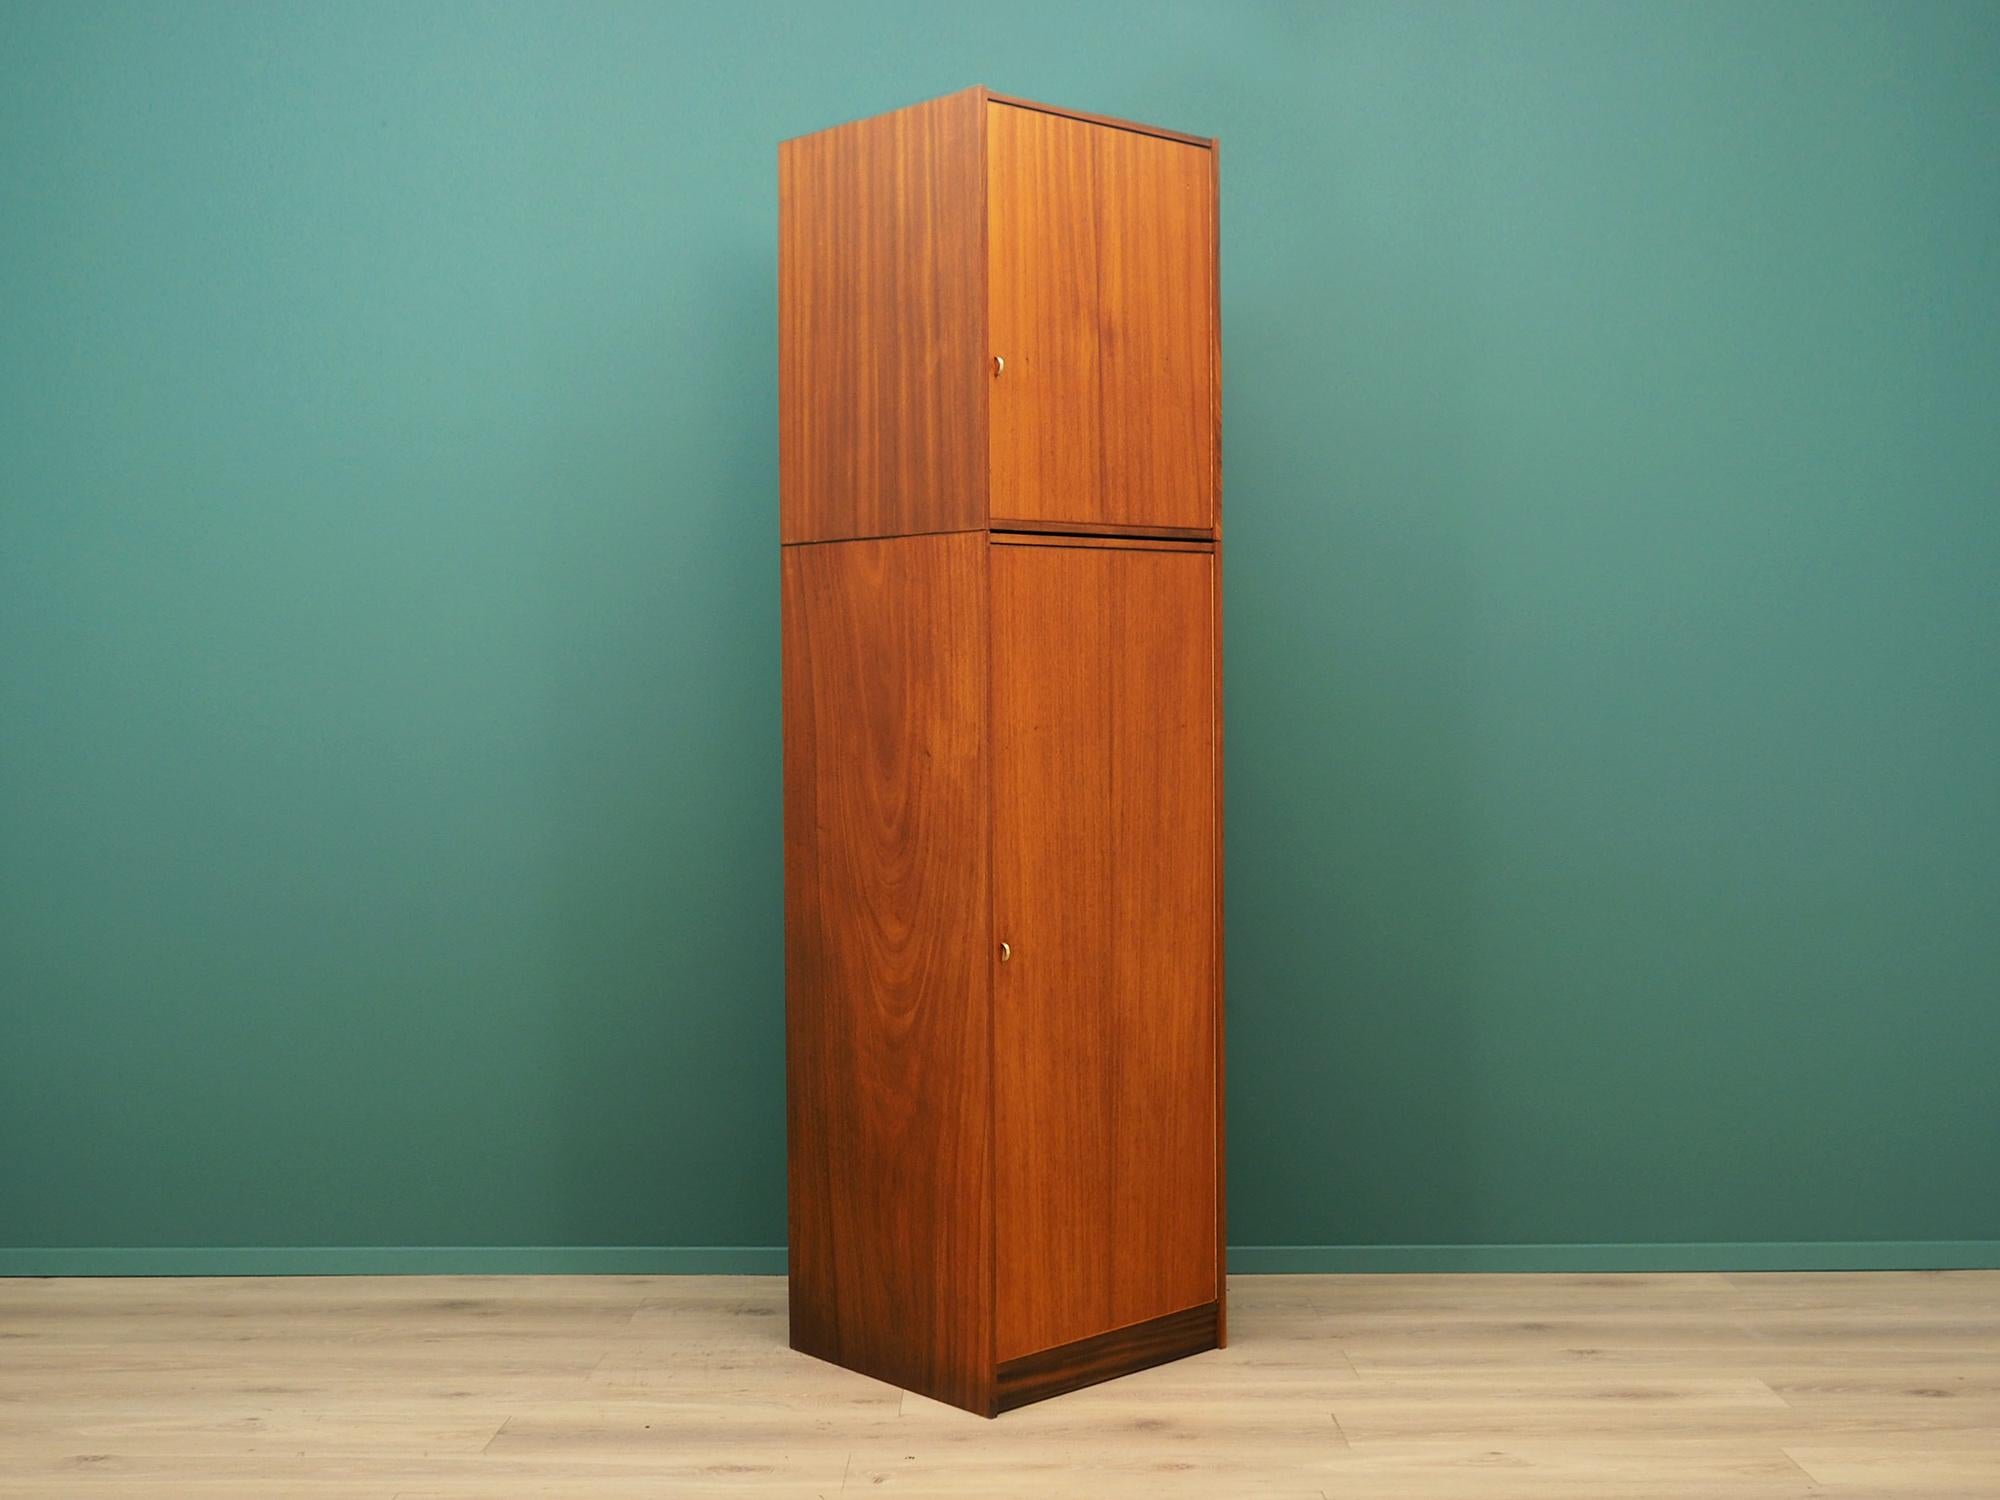 Scandinavian wardrobe from the 1960s-1970s. Danish design, Minimalist form. Surface of the furniture finished with teak veneer. In the lower section there is a handle for hangers and shelf in the upper. Preserved in good condition (minor bruises and